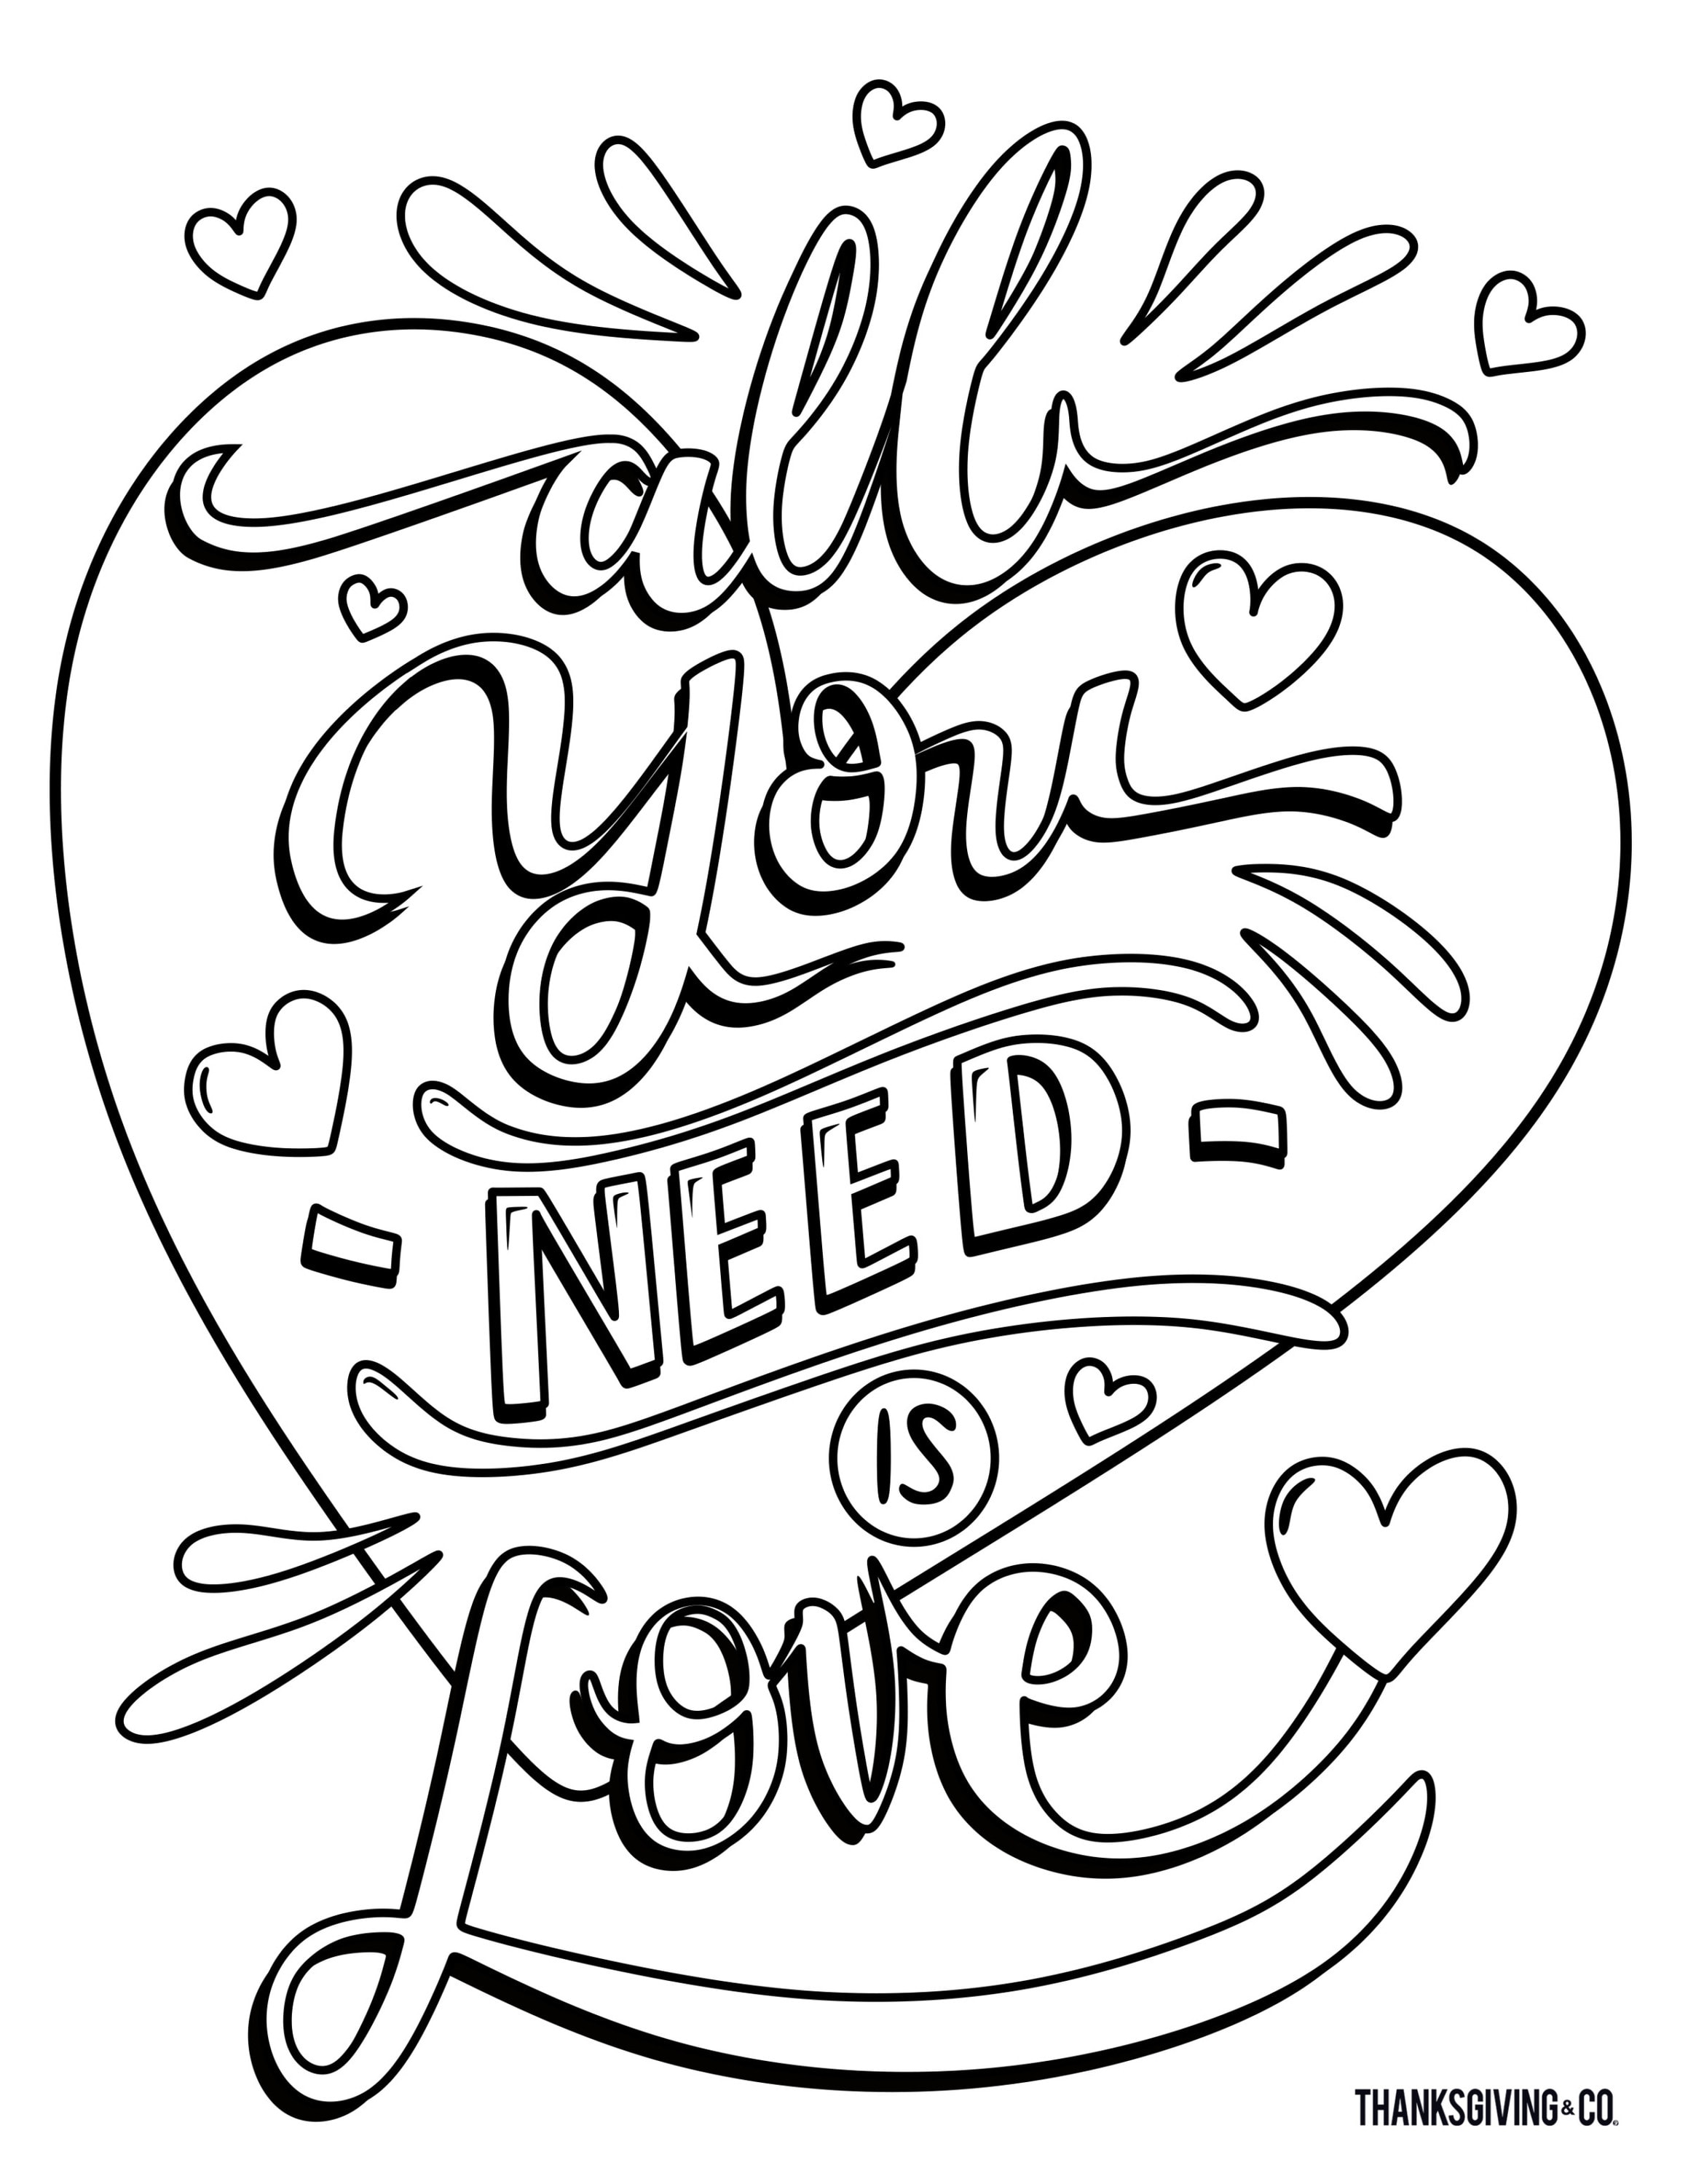 free-adult-coloring-page-for-valentine-s-day-that-will-bring-out-your